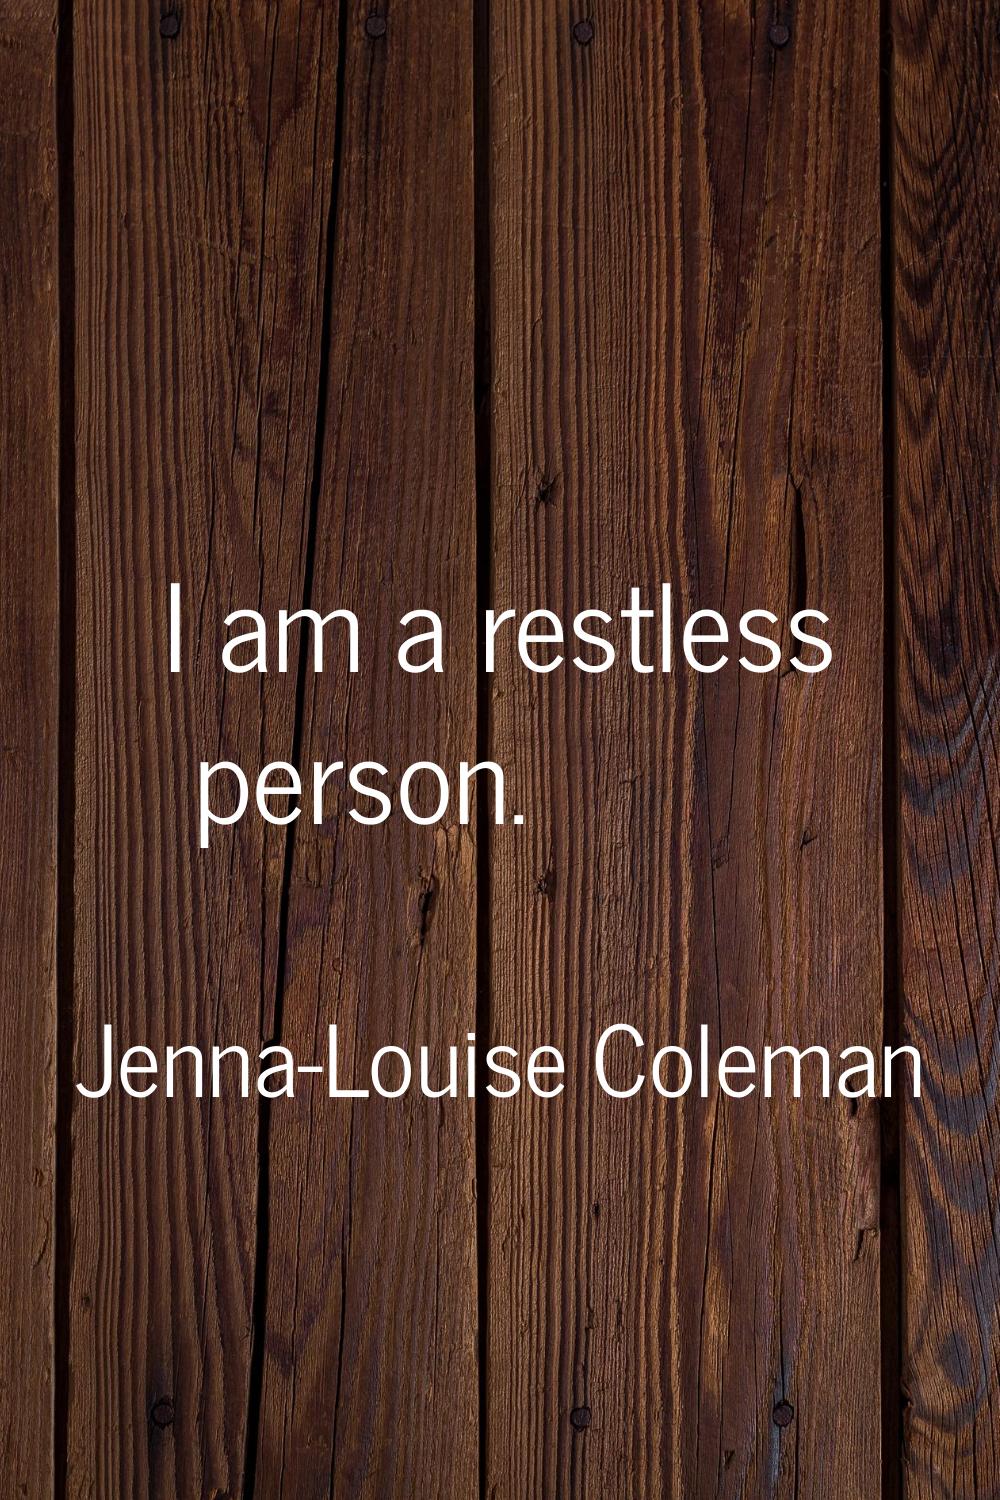 I am a restless person.